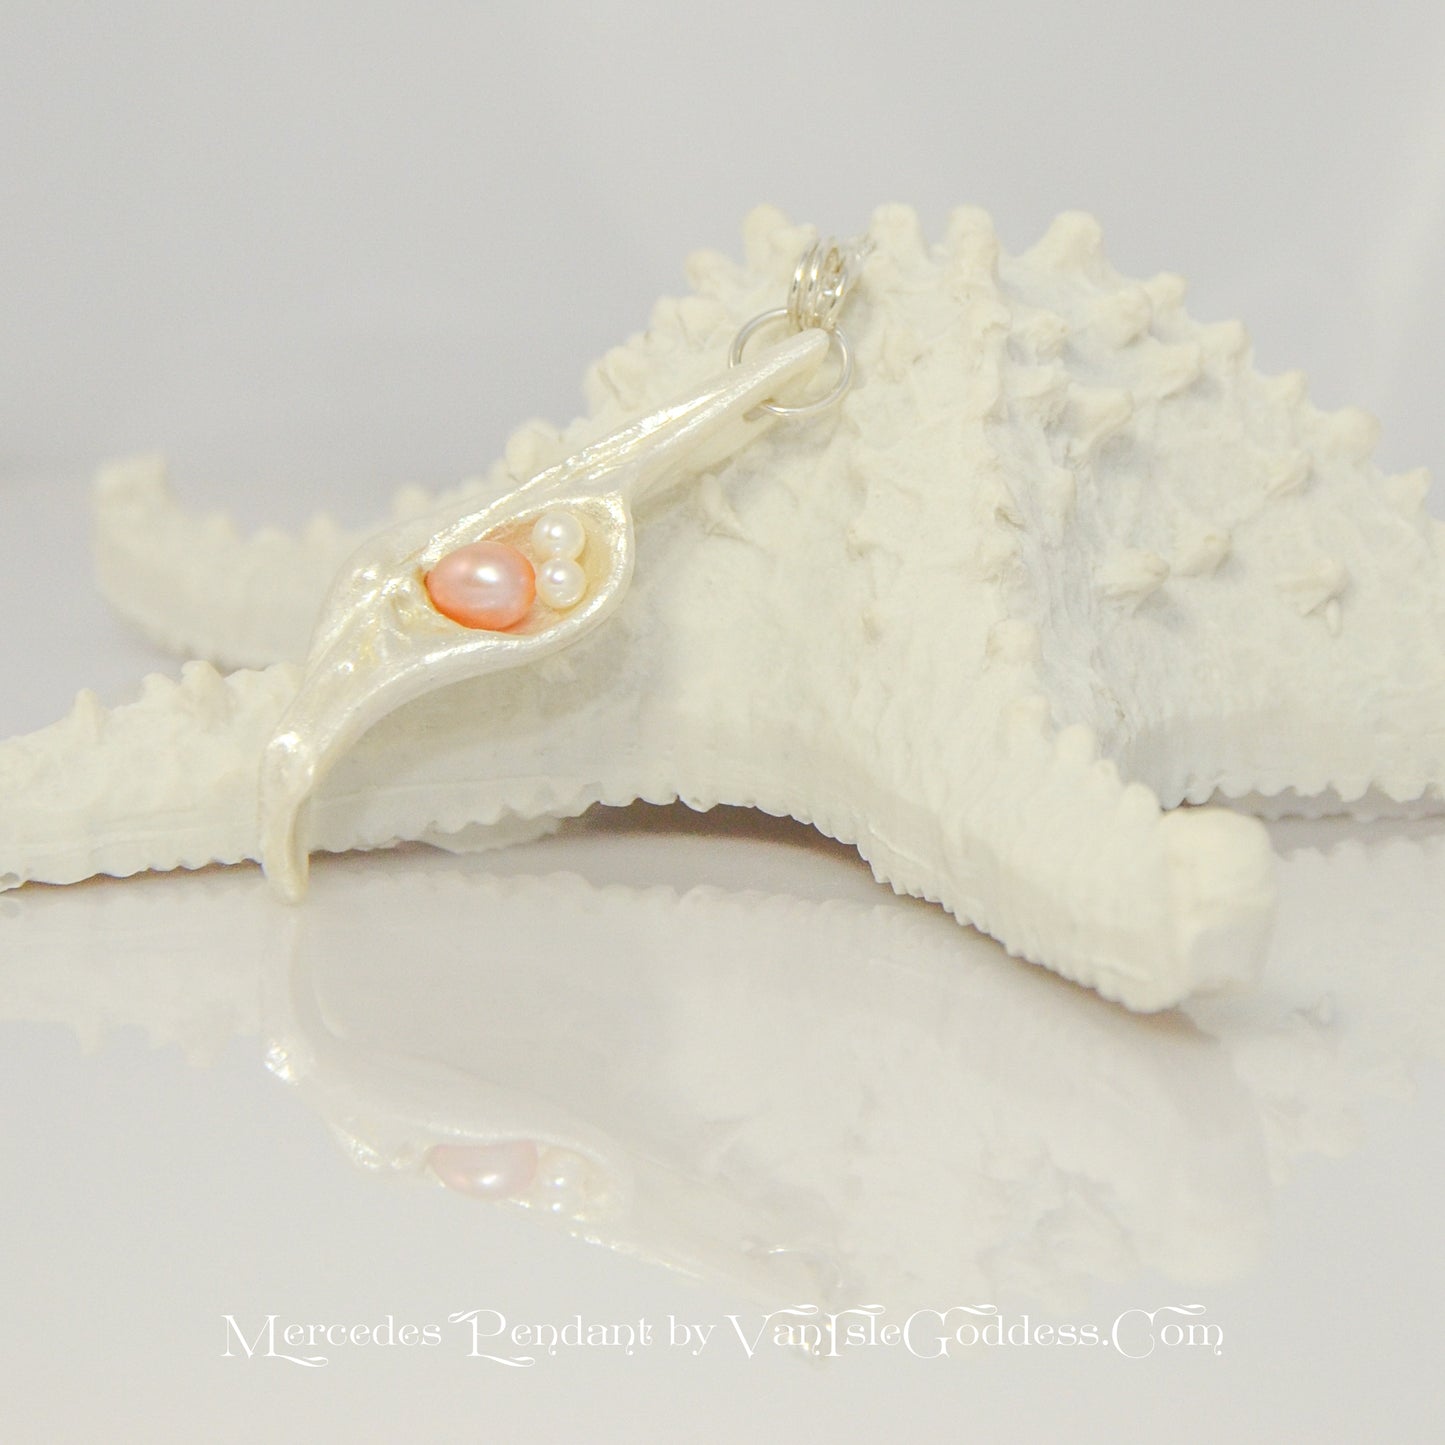 This natural seashell pendant has a real 7-8mm pink freshwater pearl and two baby pearls. The pendant is shown resting a a starfish.  The words printed on the bottom read: Mercedes Pendant by Van Isle Goddess dot com